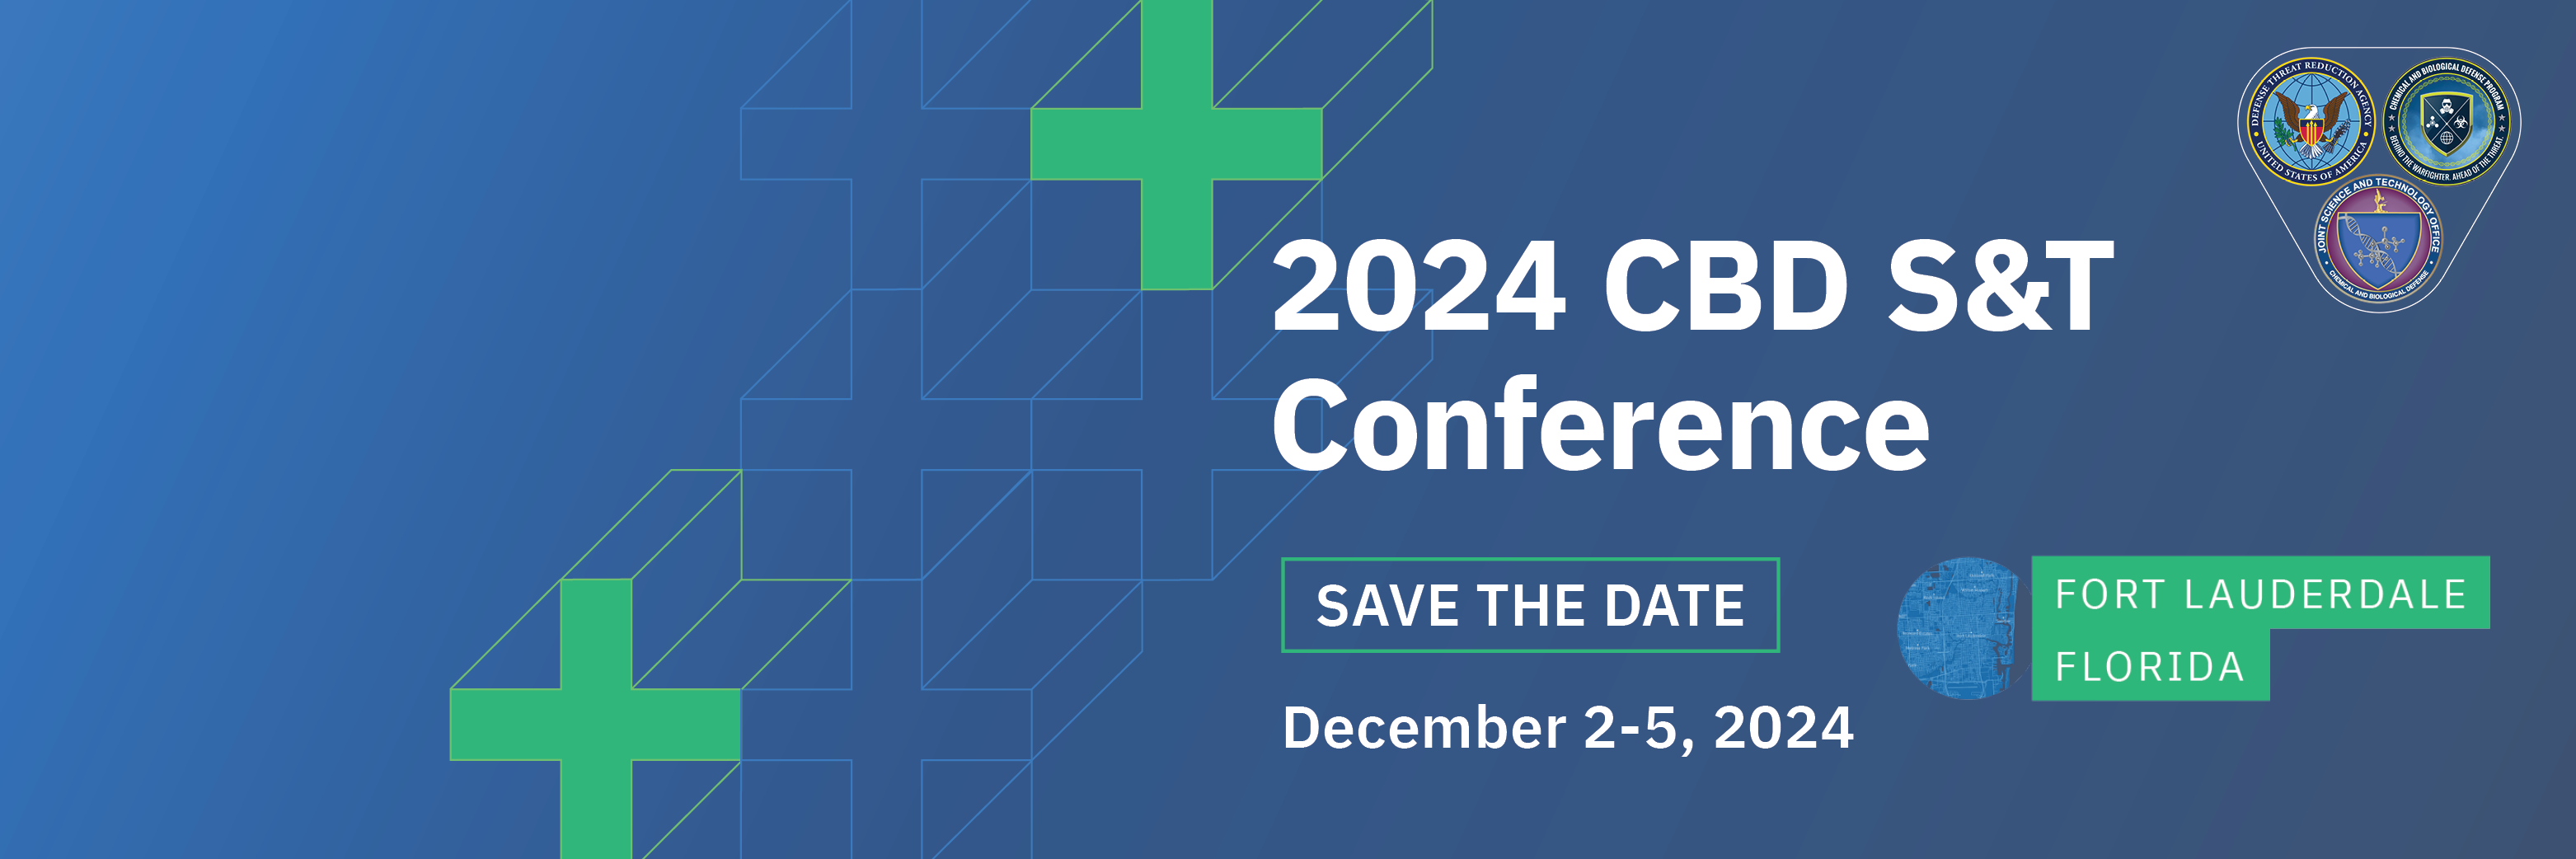 Save the Date for the 2024 CBD S&T Conference